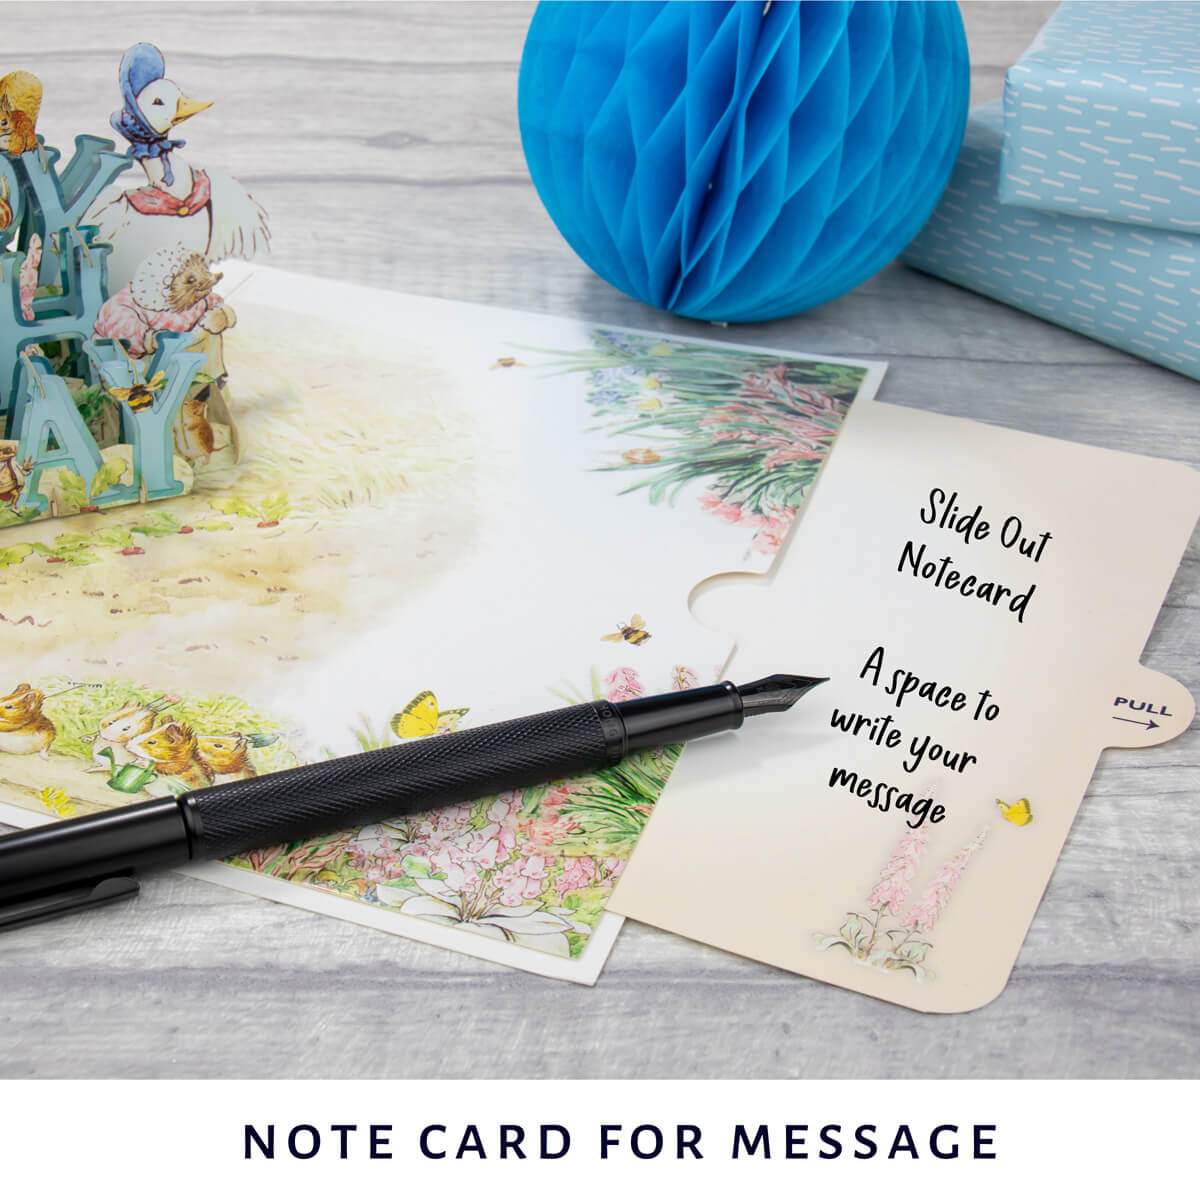 Peter Rabbit 3D Card slide out notecard which allows you to write your personal message without writing on the pop up card itself.  